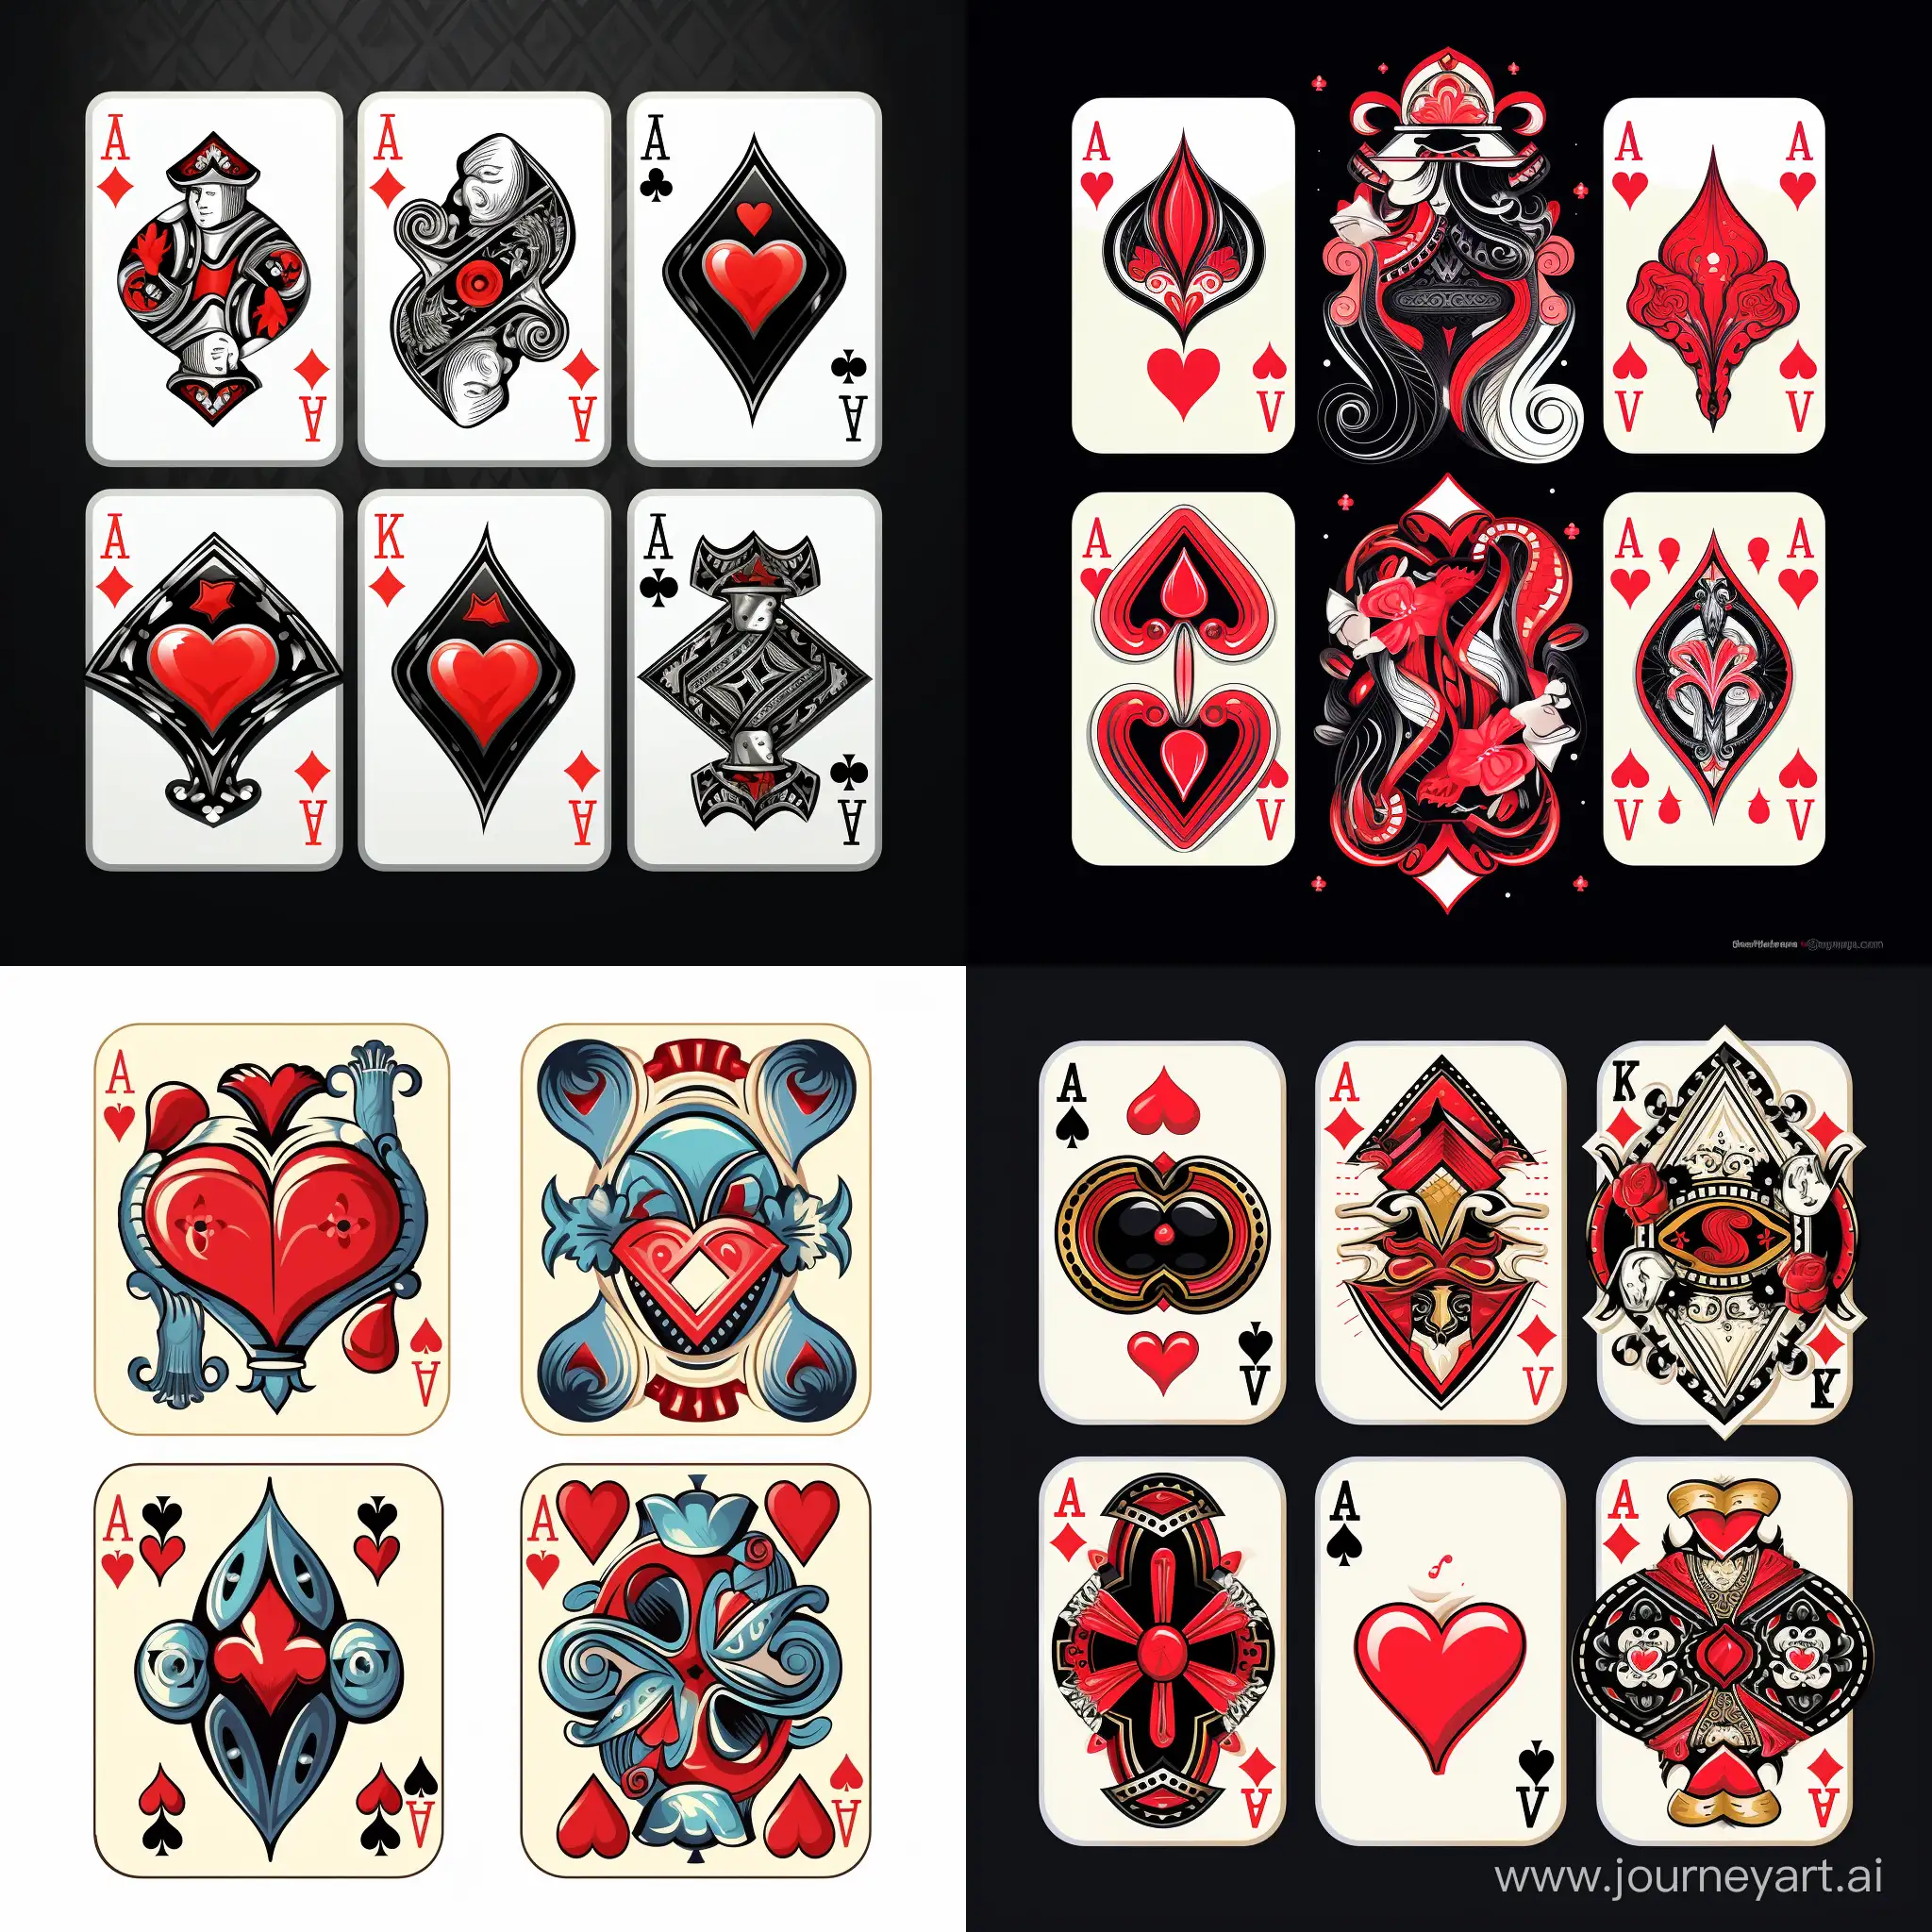 Four design options, clubs, diamonds, spades, clubs, backs of playing cards, with an ornament of spades, diamonds, clubs, hearts, musical symbols, cartoon style, pop art style